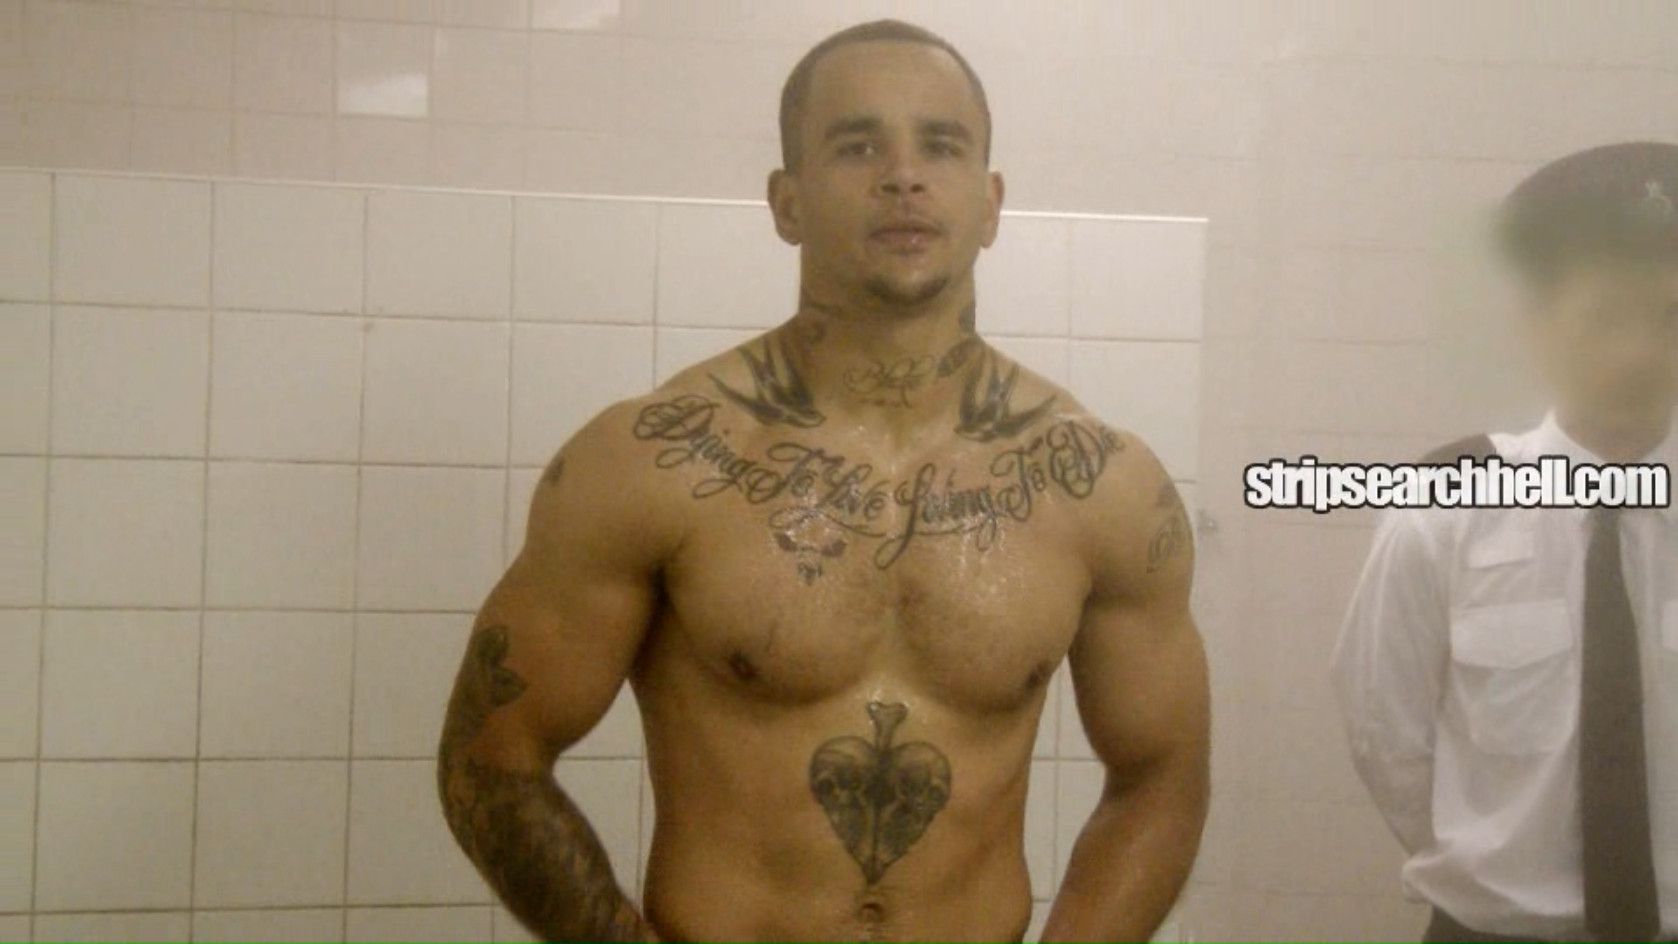 A muscular, tattooed prisoner gets strip-searched